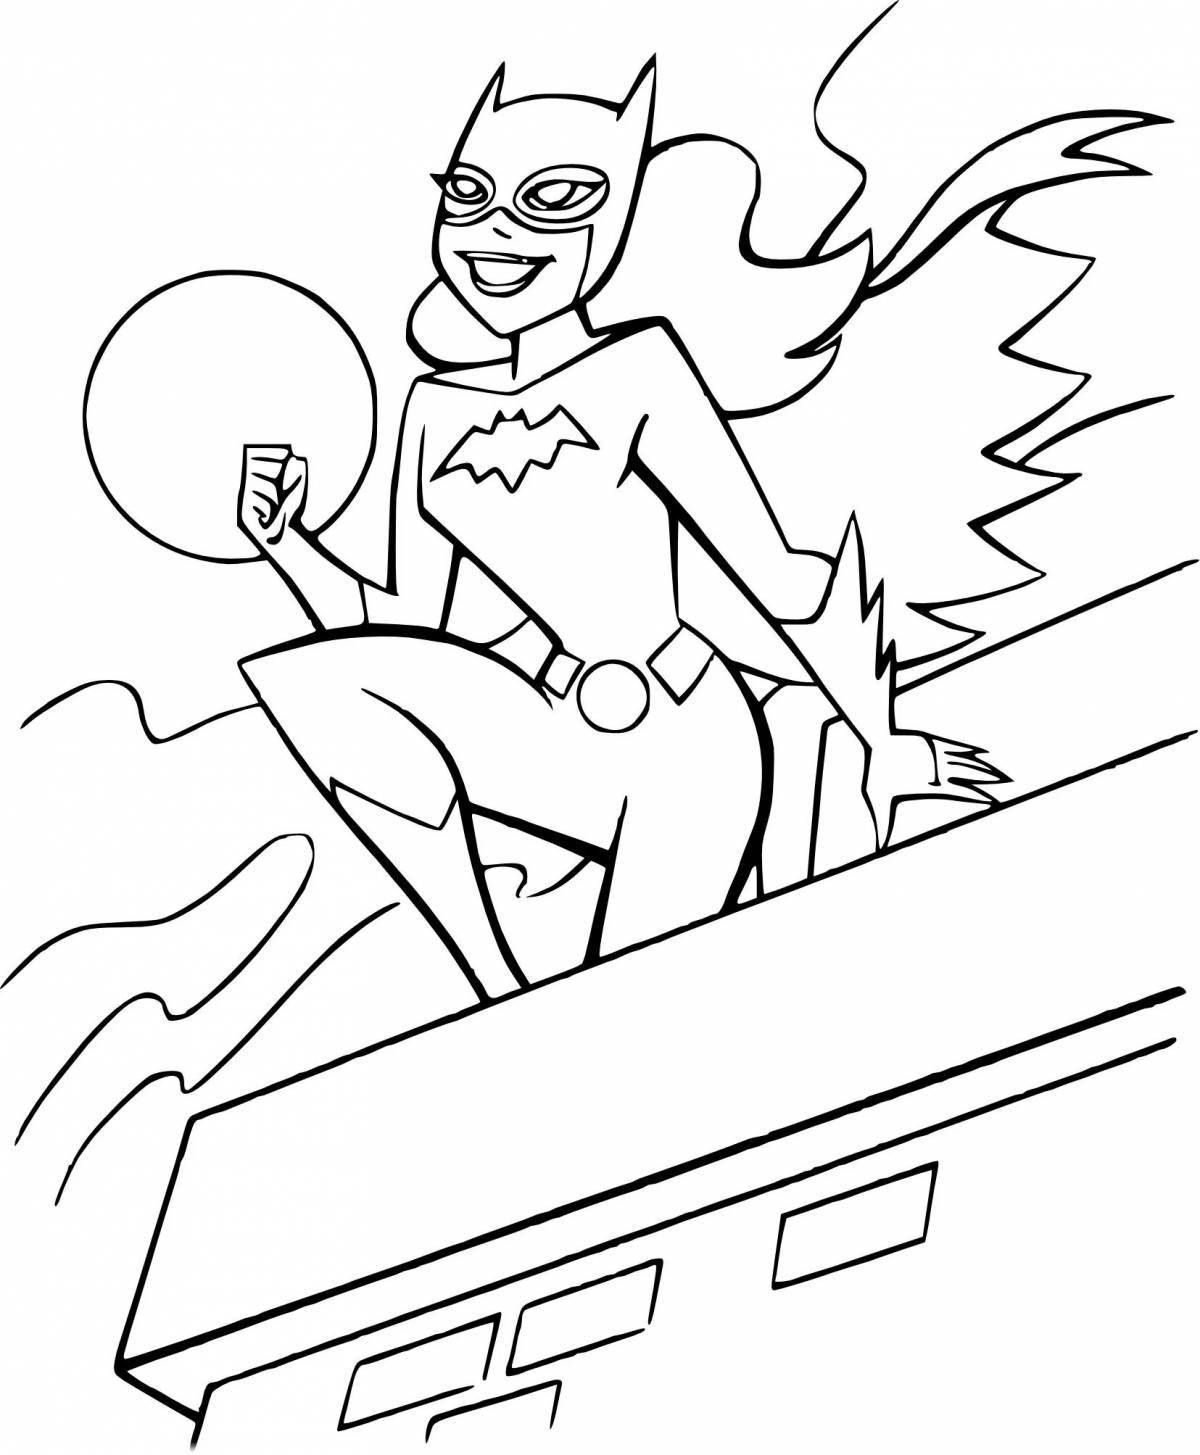 Coloring page glowing batman and catwoman